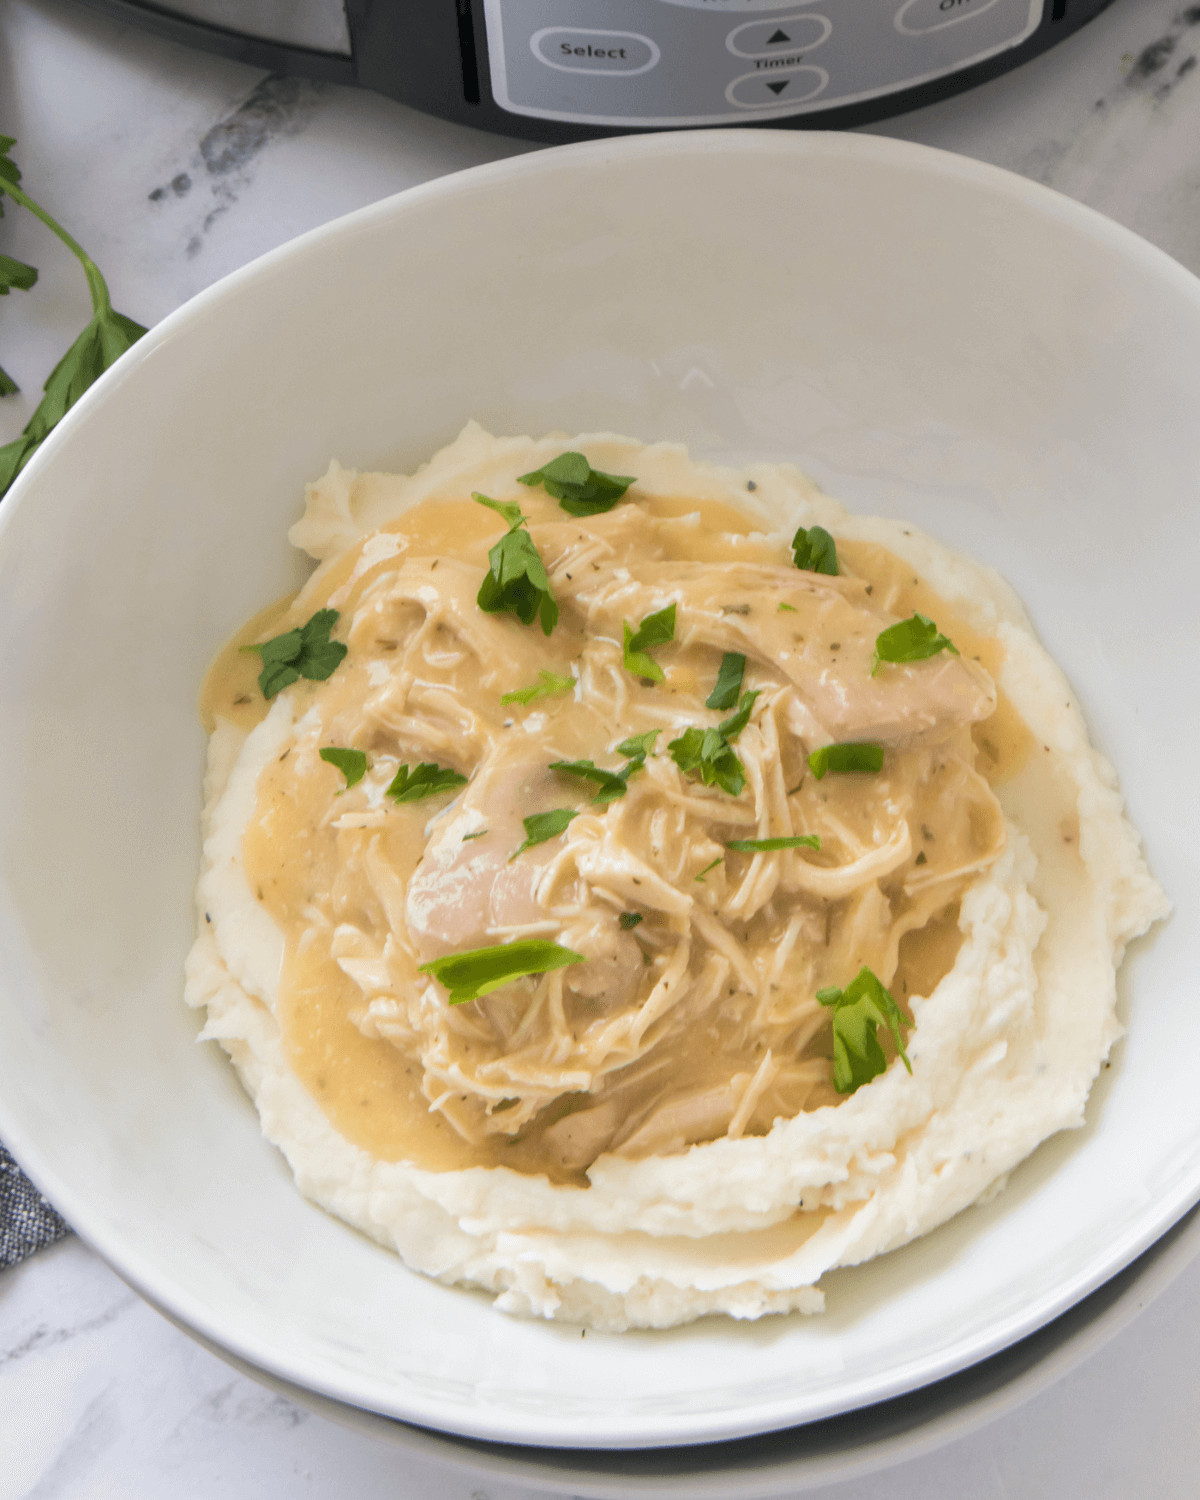 A bowl with mashed potatoes with the chicken and gravy on top.